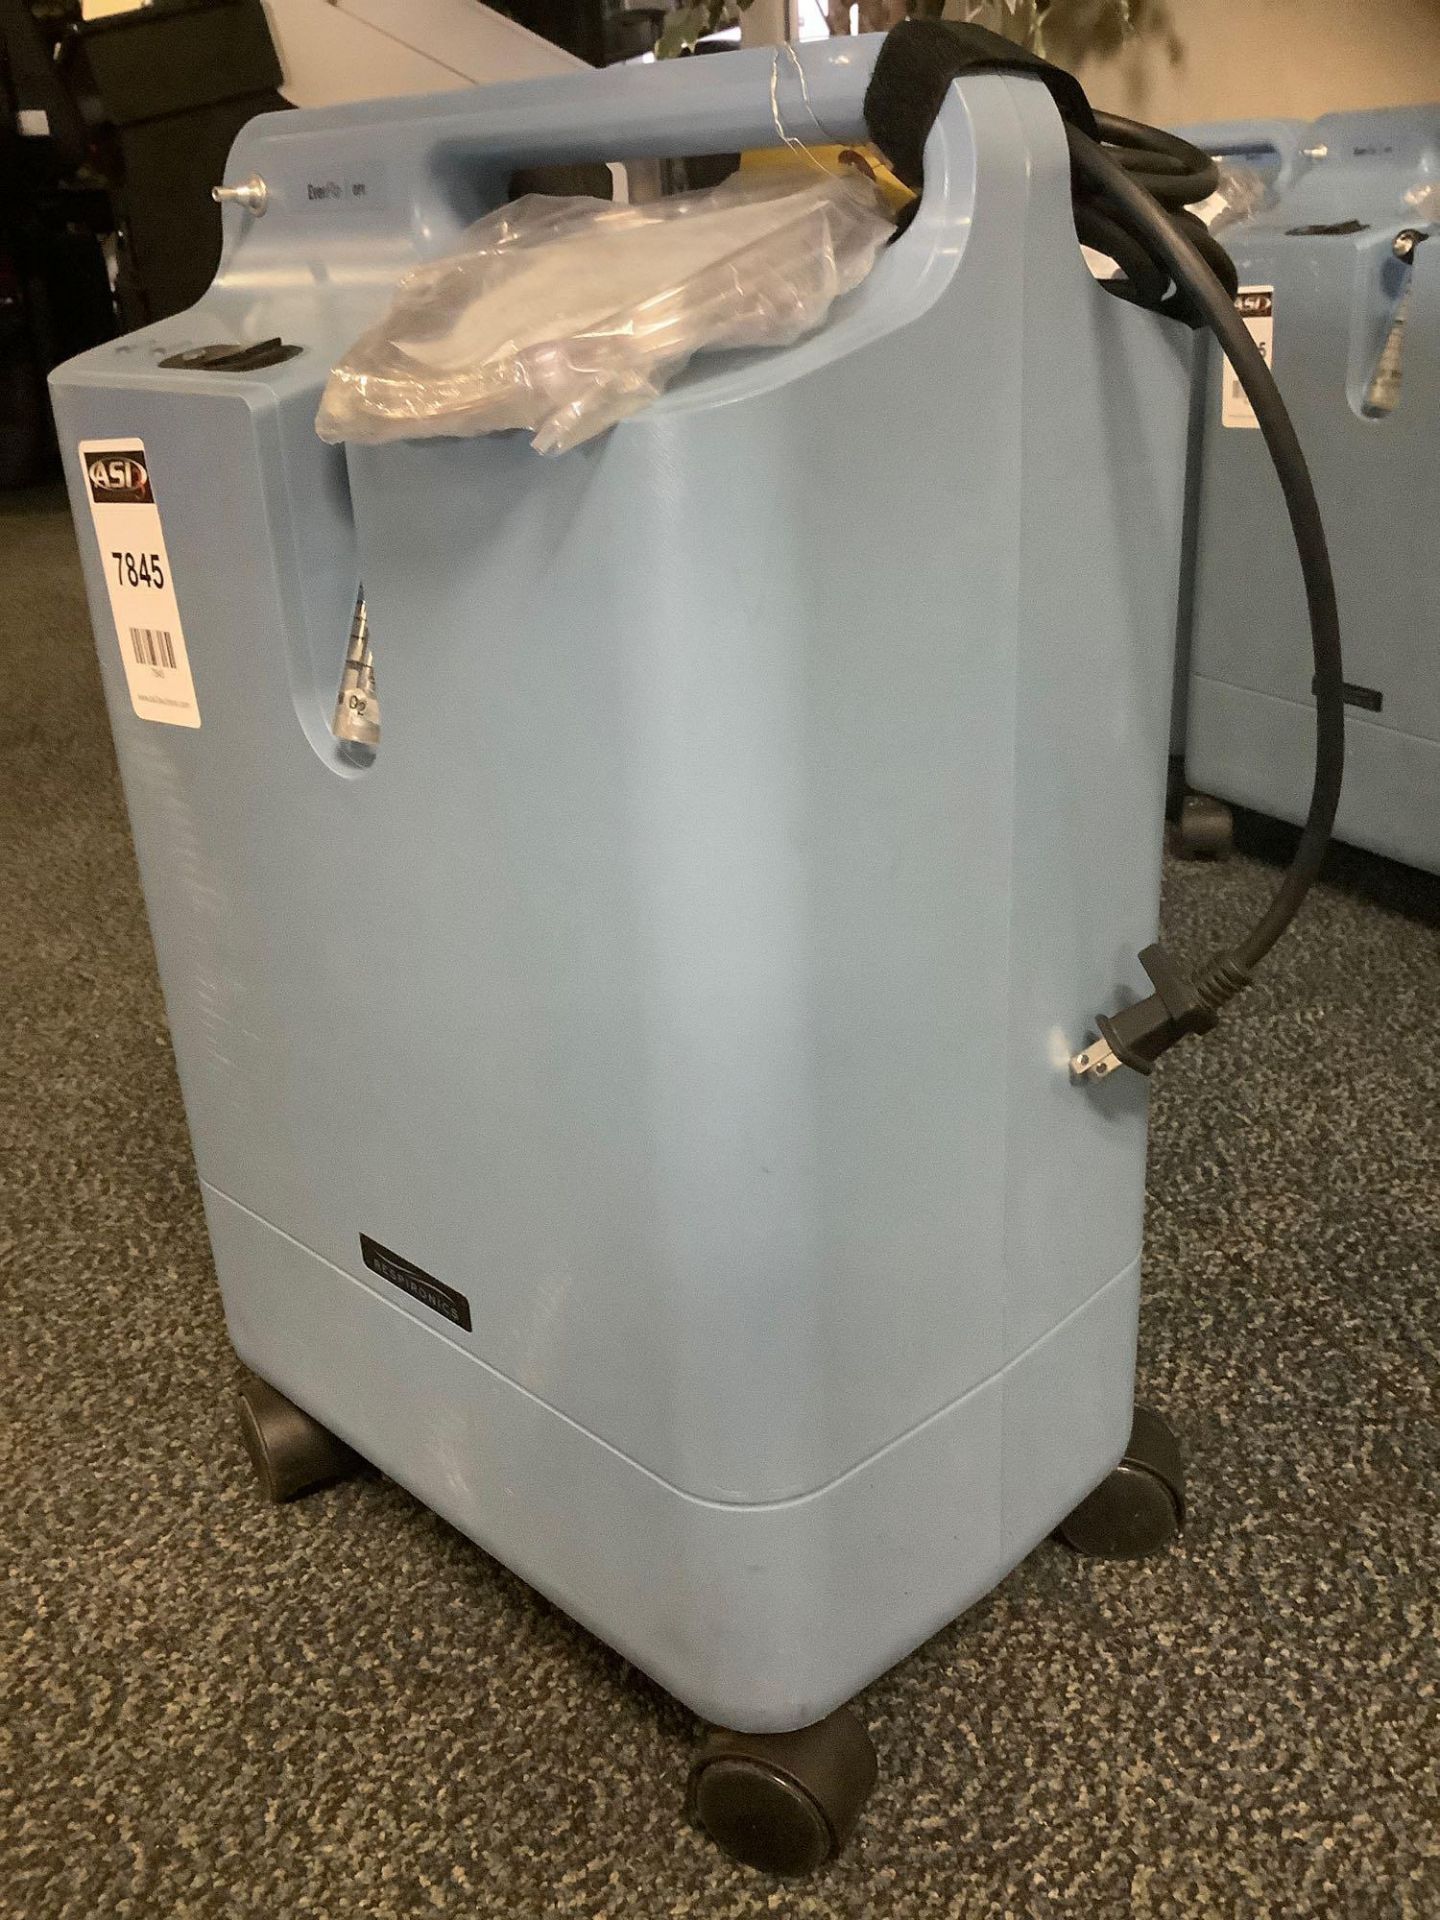 RESPIRONICS EVERFLO I OPI OXYGEN CONCENTRATOR, APPROX 120VOLTS, APPROX MAX O2 96%, NEW HOSE INCLUDED - Image 2 of 6